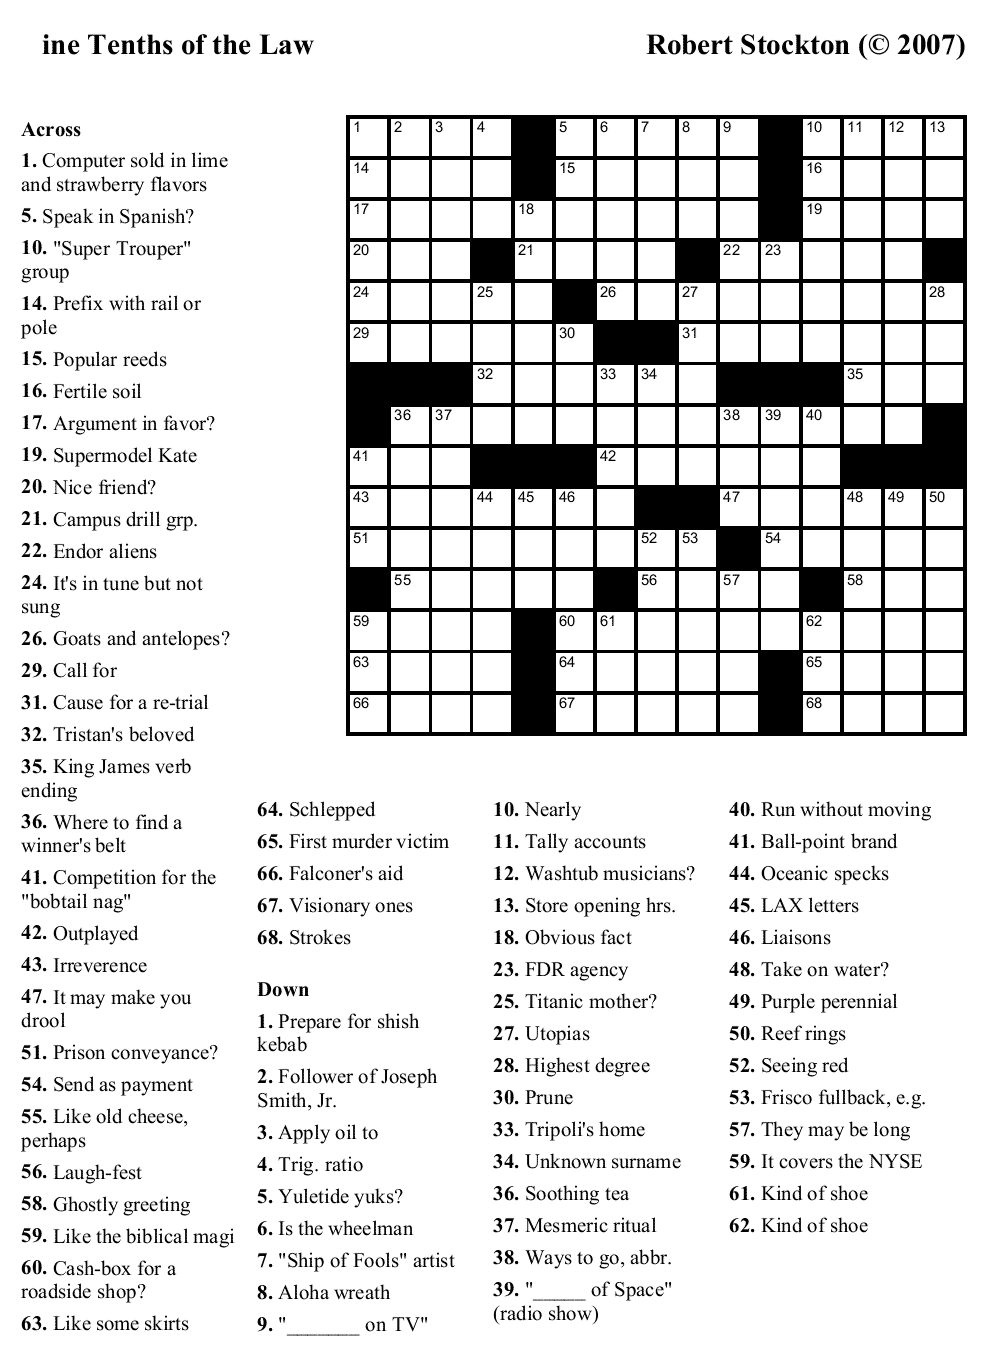 Crossword Puzzles Printable - Yahoo Image Search Results | Crossword - Printable Sports Crossword Puzzles With Answers